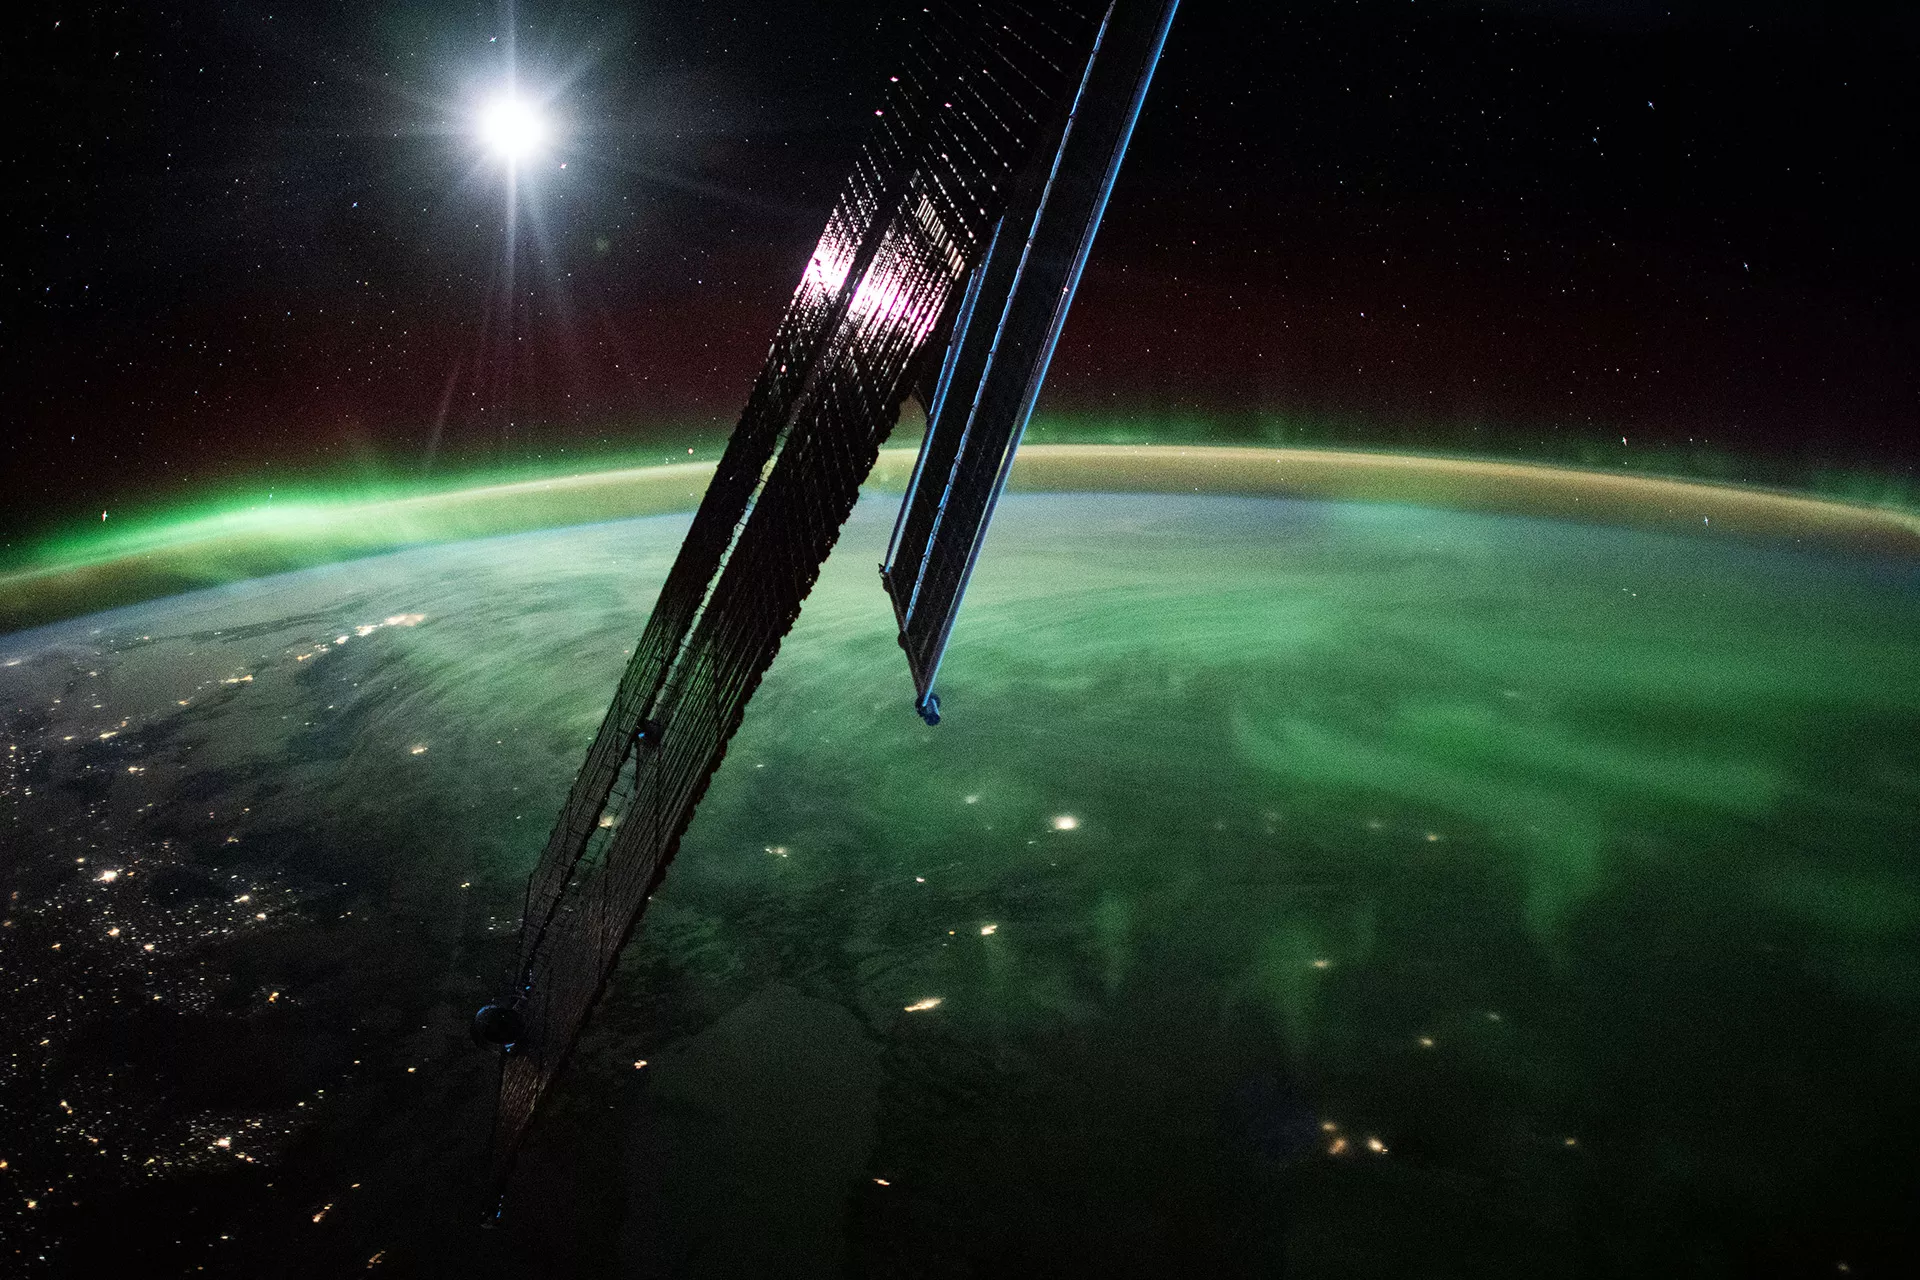 Photo from space of the Earth's horizon illuminated with colorful streaks of light. Parts of the spacecraft's solar arrays are visible in the foreground.